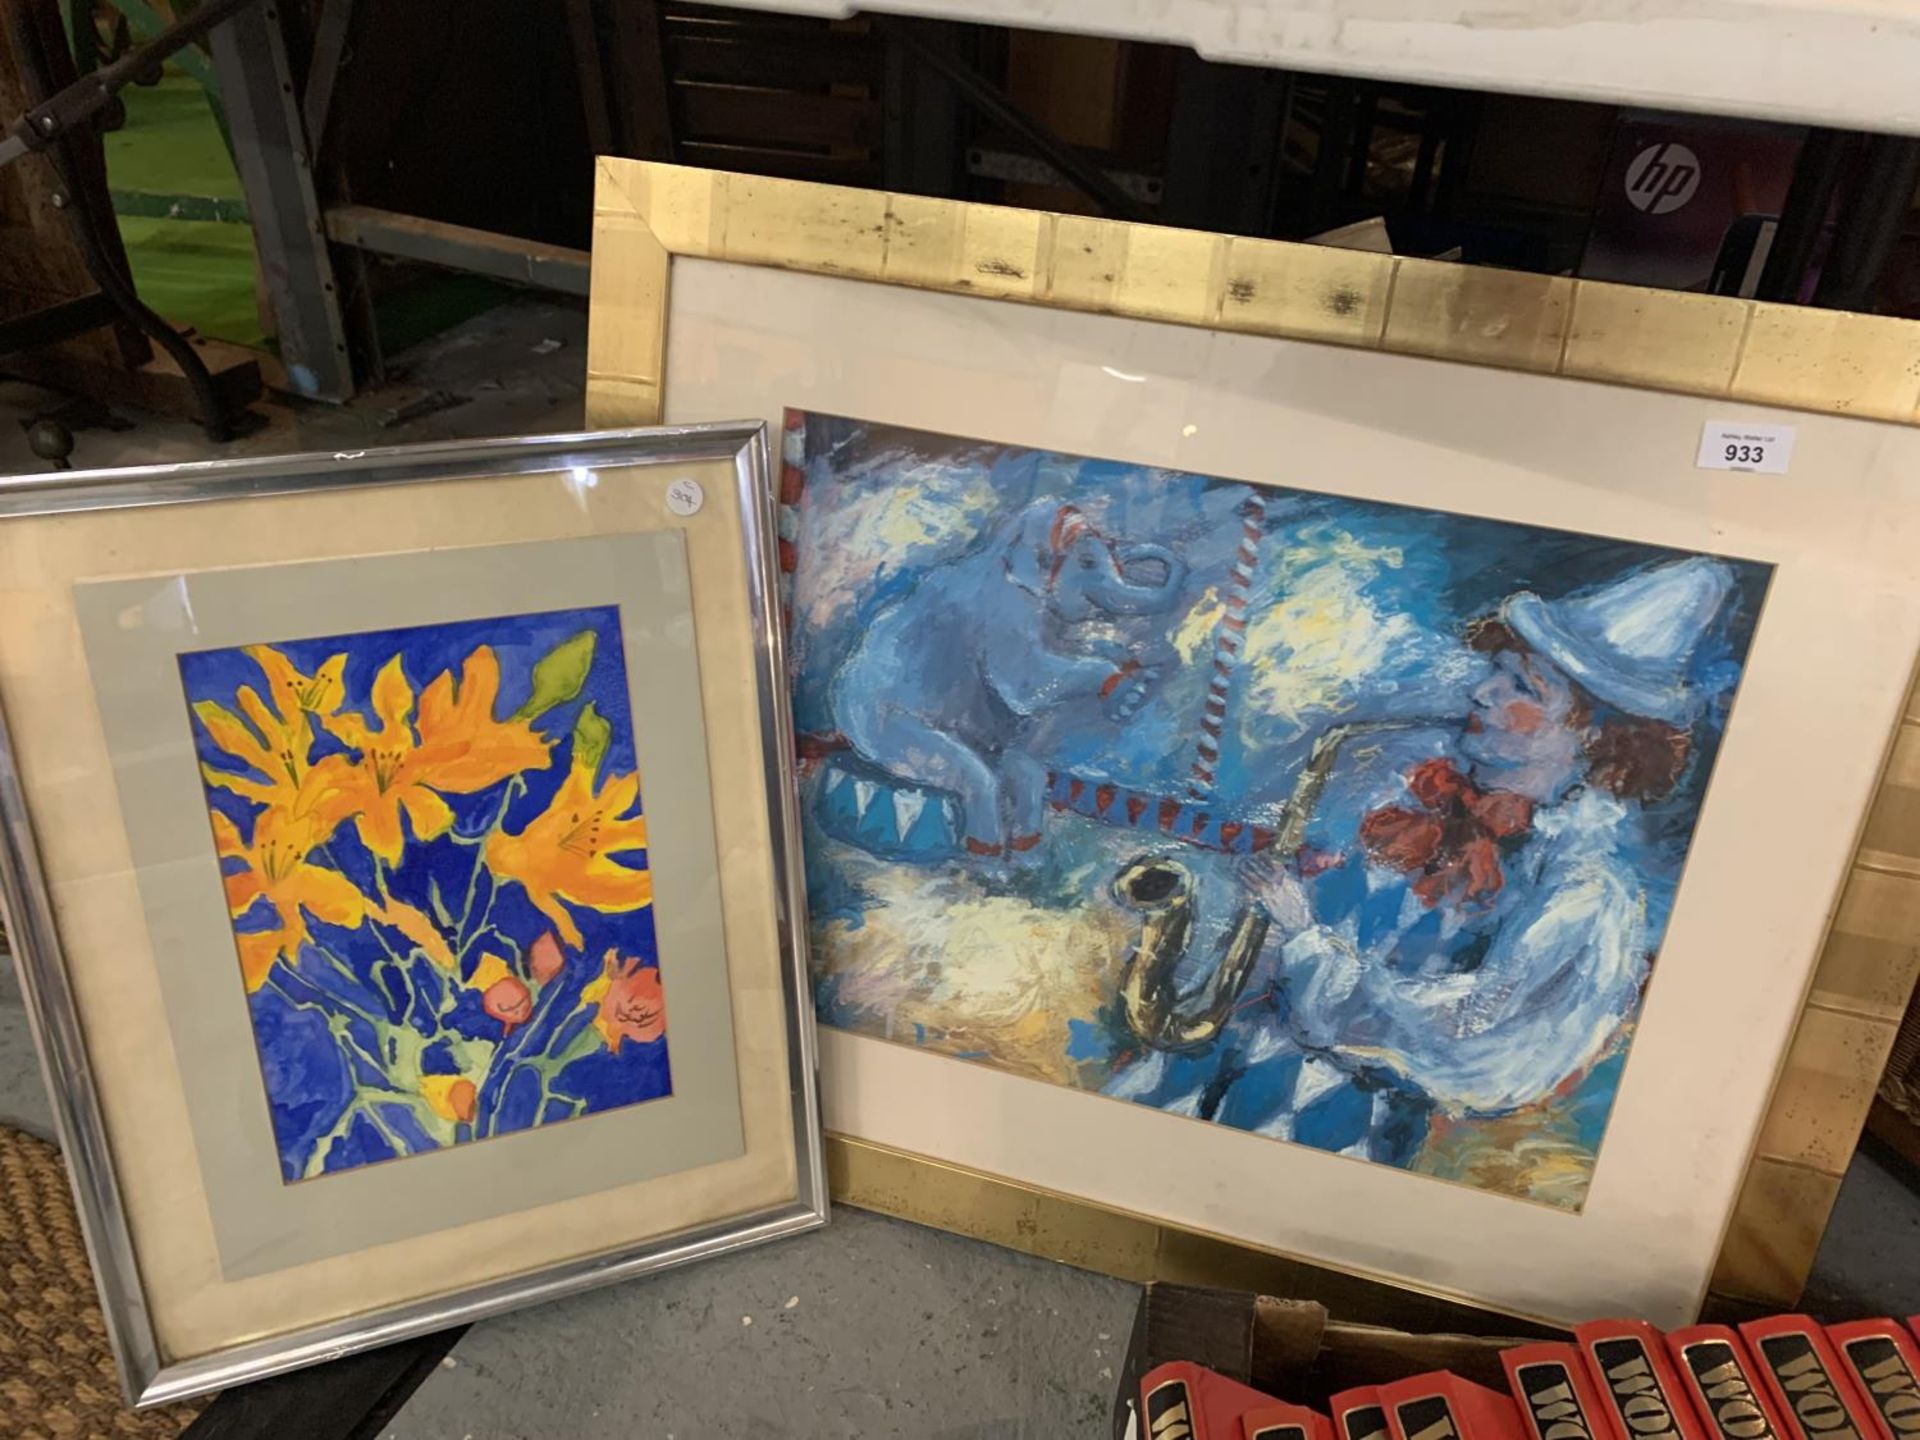 TWO FRAMED PICTURES ONE OF A CLOWN PLAYING THE SAXOPHONE